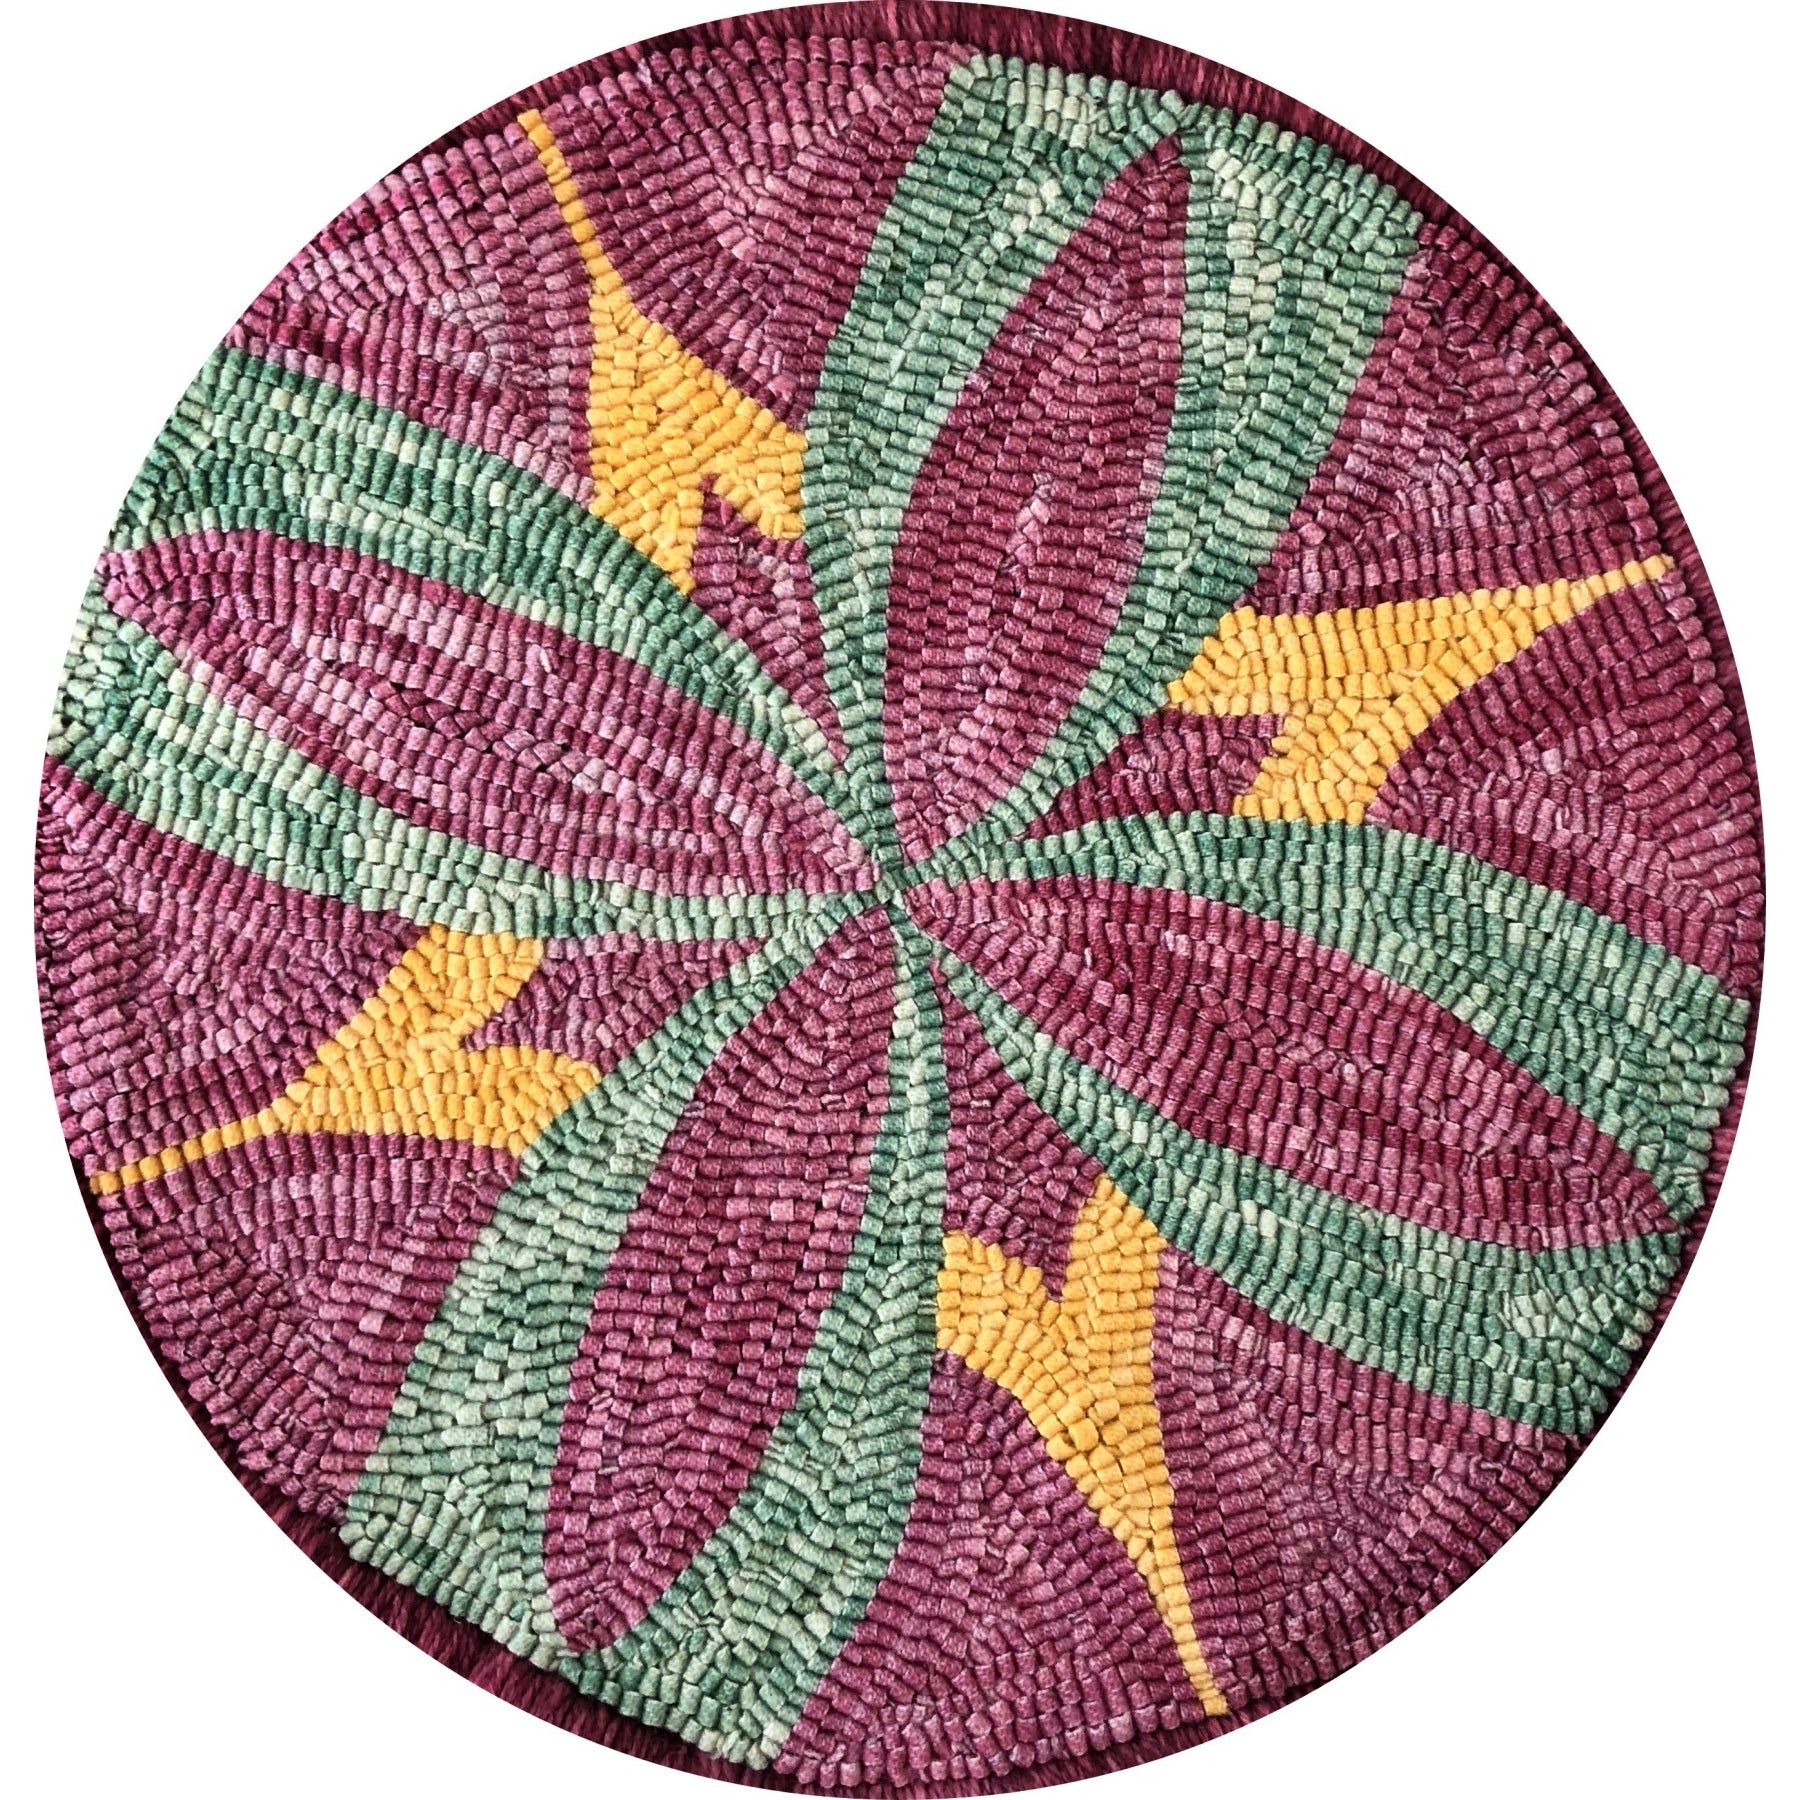 Flower on Diamond Chairseat, rug hooked by Claudia Lampley